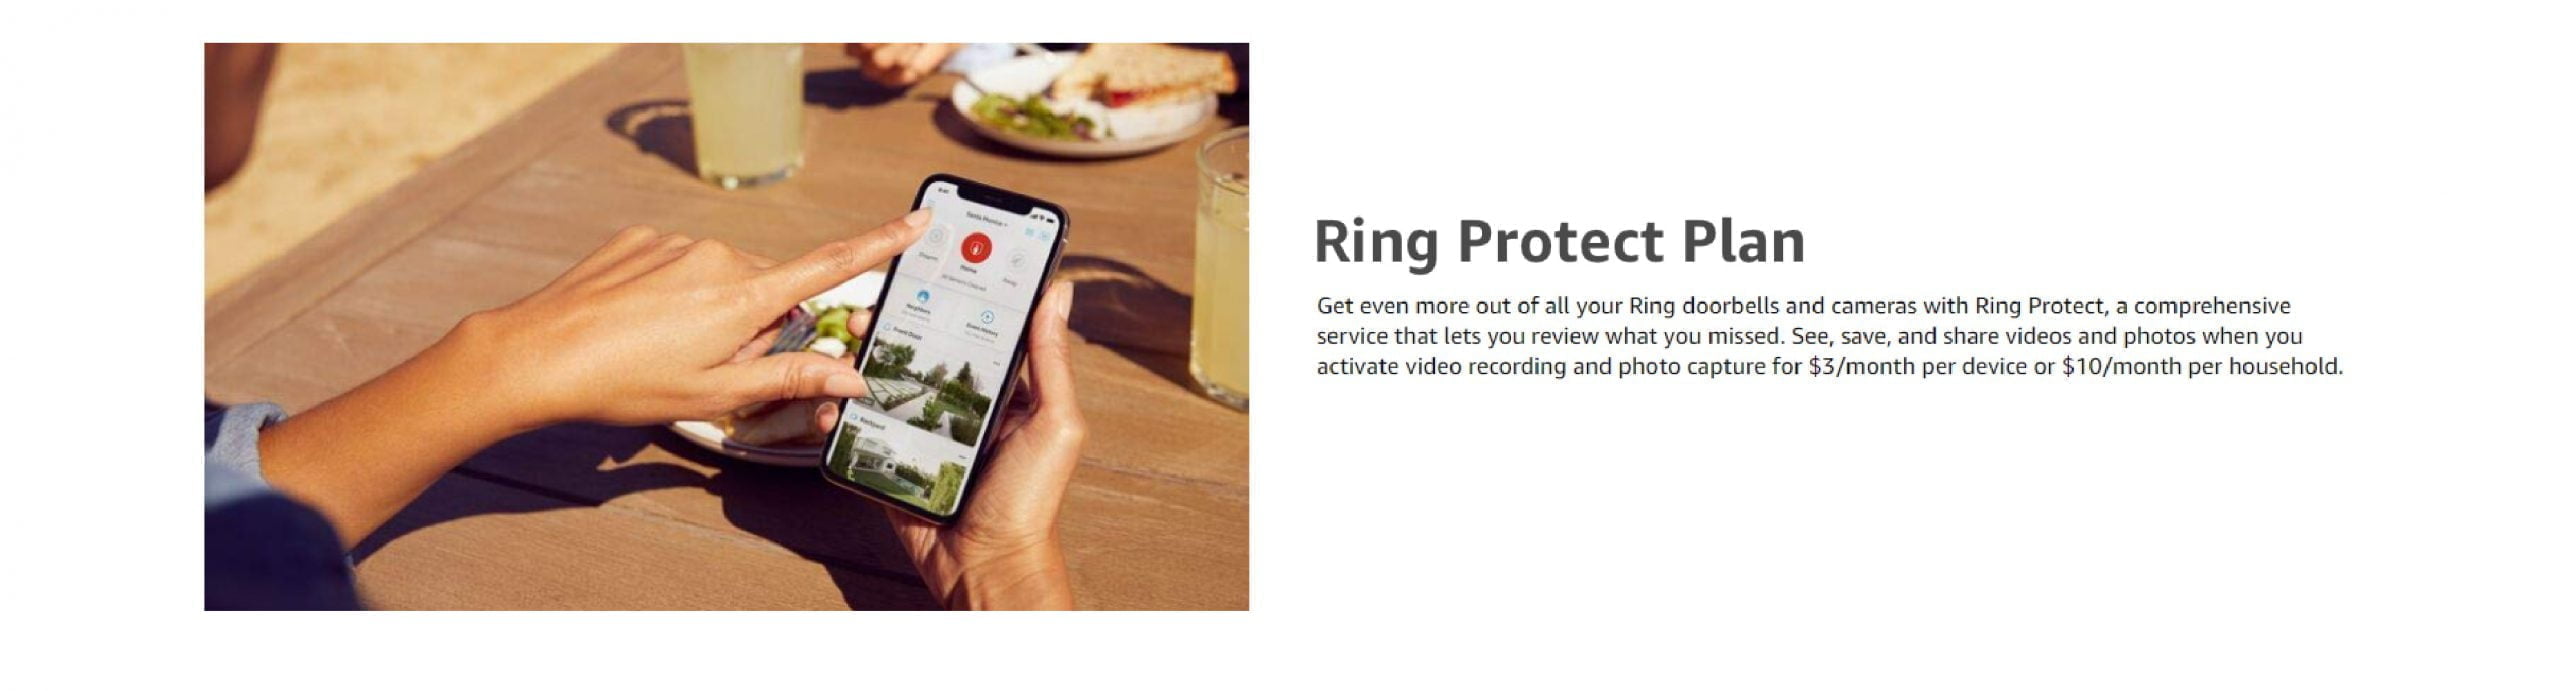 Sw23Rr 08 Scaled Ring Https://Youtu.be/Sdouokk6Eyk Add Security Inside Or Out With A Versatile Camera That Goes Almost Anywhere. Ring Stick Up Cam Battery Is An Indoor/Outdoor Camera That Sends Notifications To Your Phone And Tablet Whenever Motion Is Detected. Answer The Notification, And You Can See, Hear, And Speak To People On Camera From Anywhere. Place It On A Flat Surface So You Can Move It When You Need To. Or Mount It To A Wall For More Permanent Placement. With Ring Stick Up Cam Battery, You’ll Always Be Connected To Home So You Can See What’s Happening At Any Time. One Year Manufacturer Warranty Ring Ring Indoor/Outdoor 1080Hd Security Battery Cam With Two Way Talk